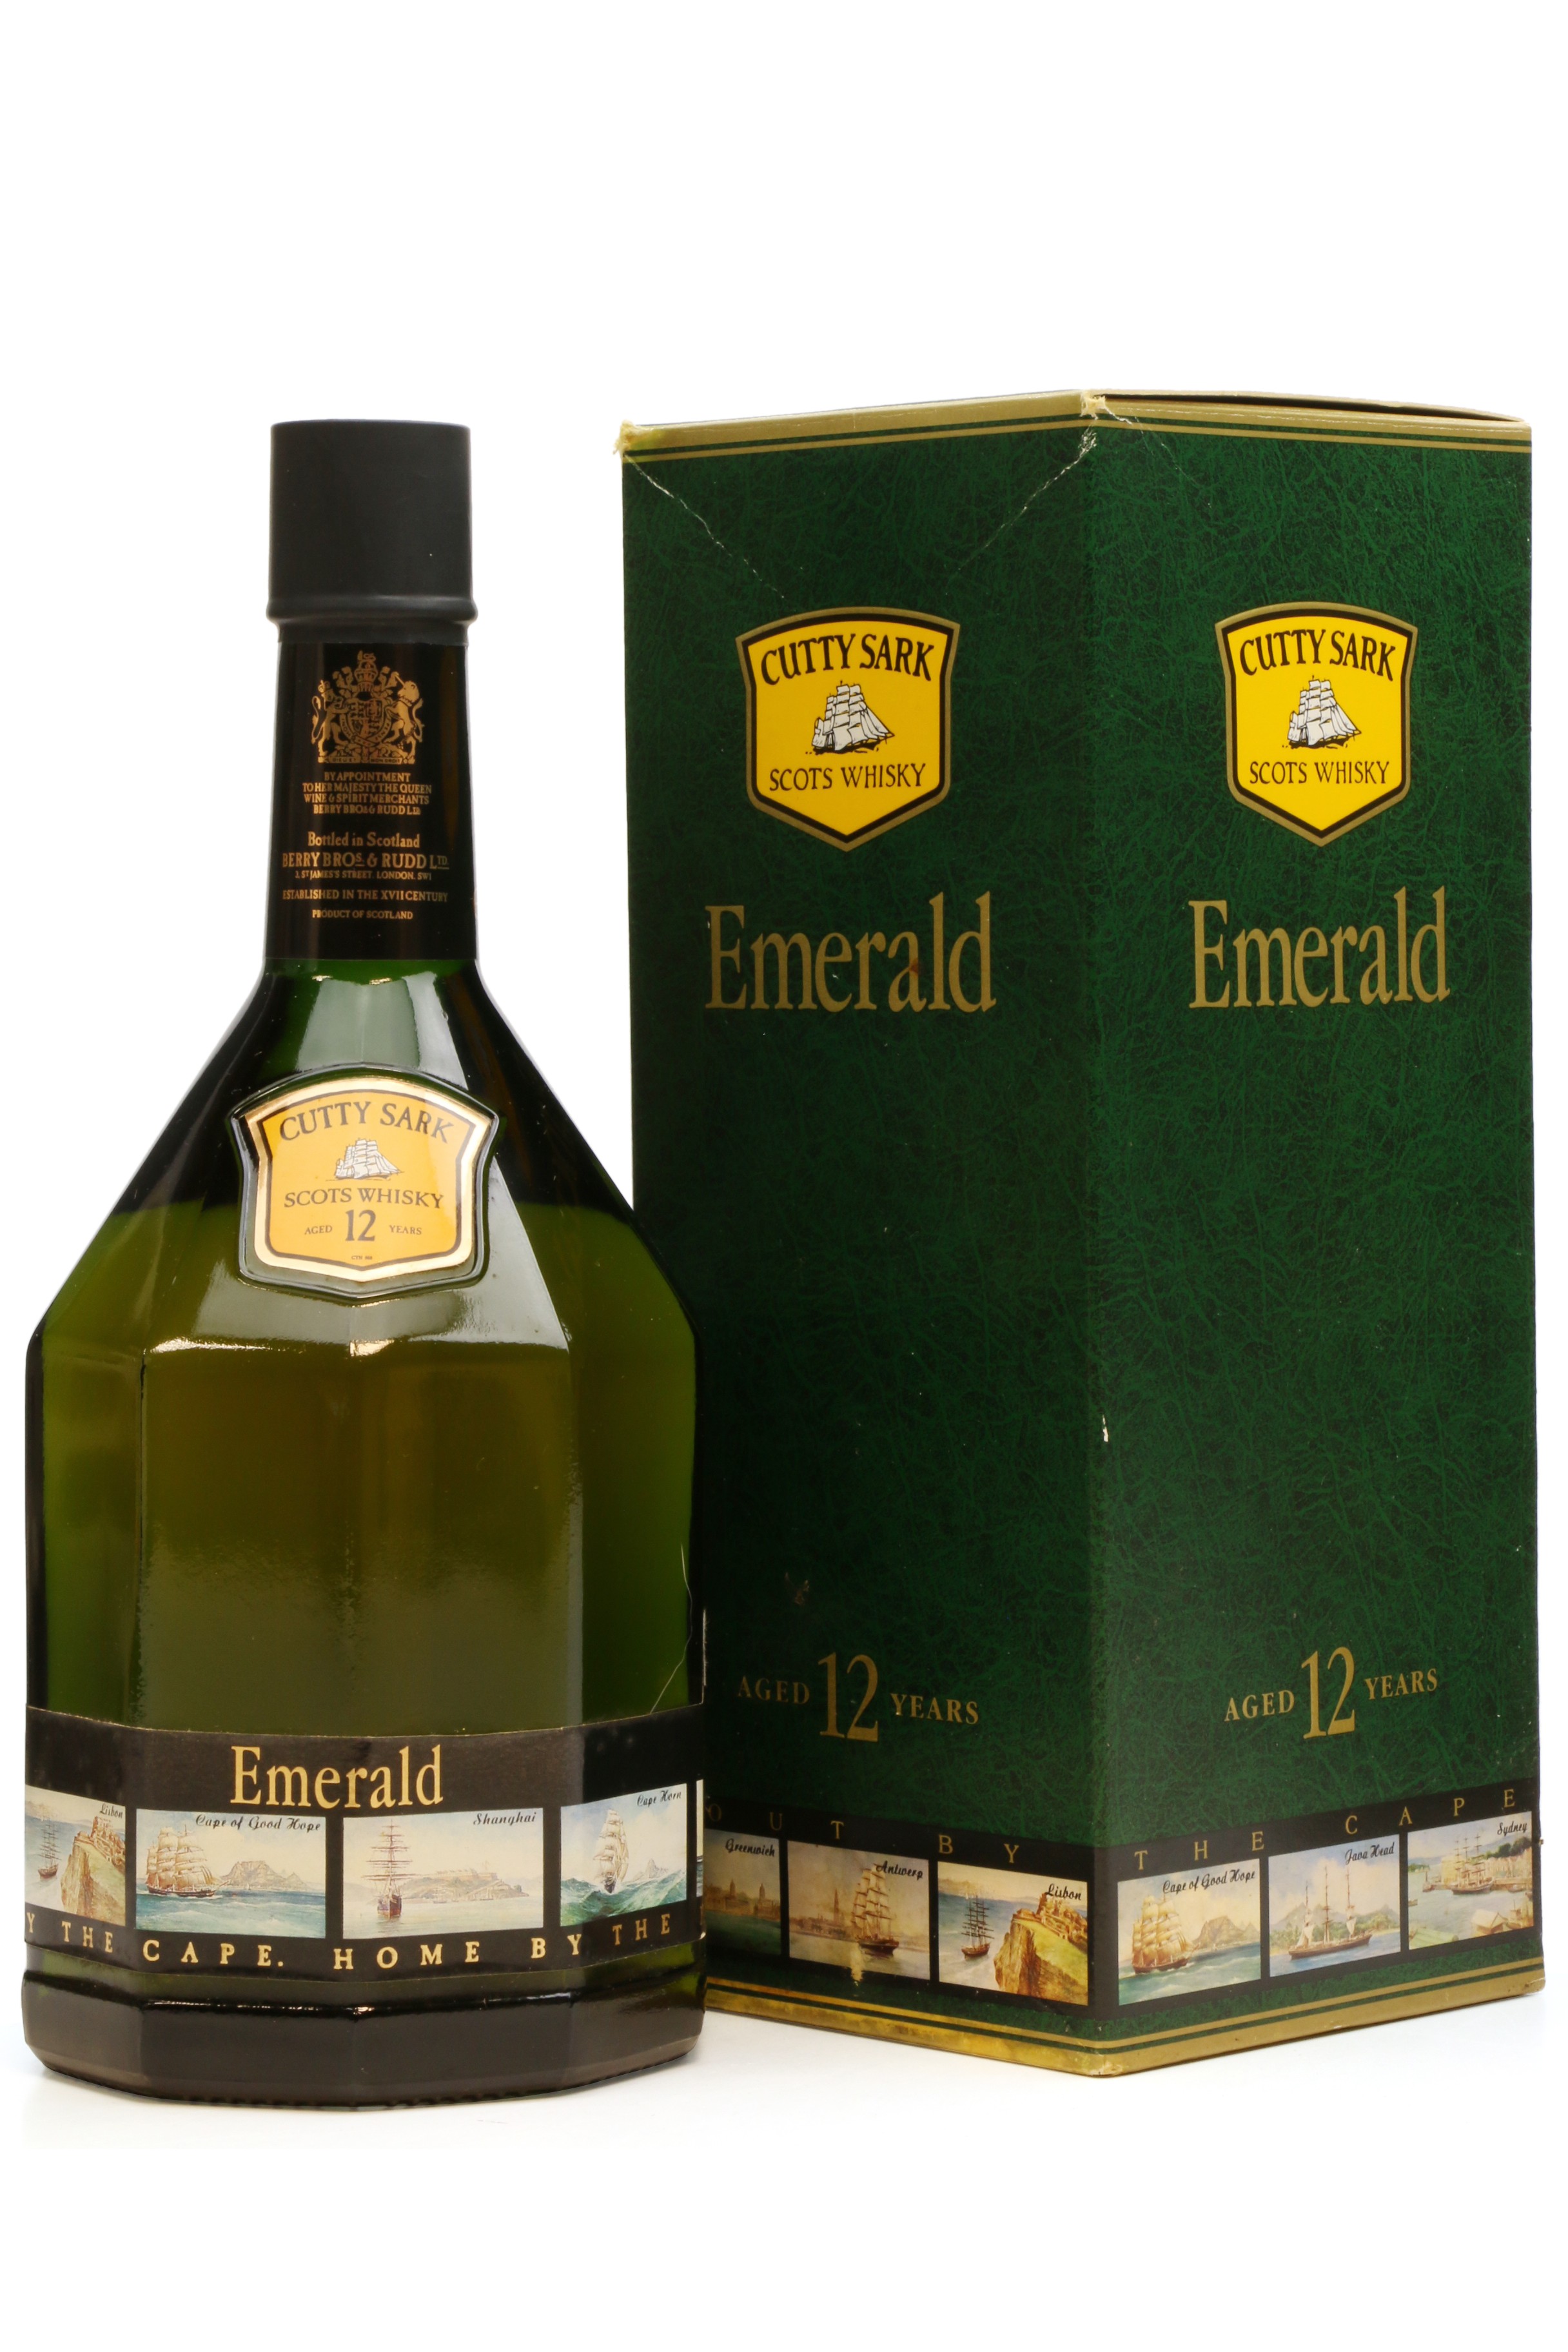 Cutty Sark 12 Years Old - Emerald (1 Litre) - Just Whisky Auctions